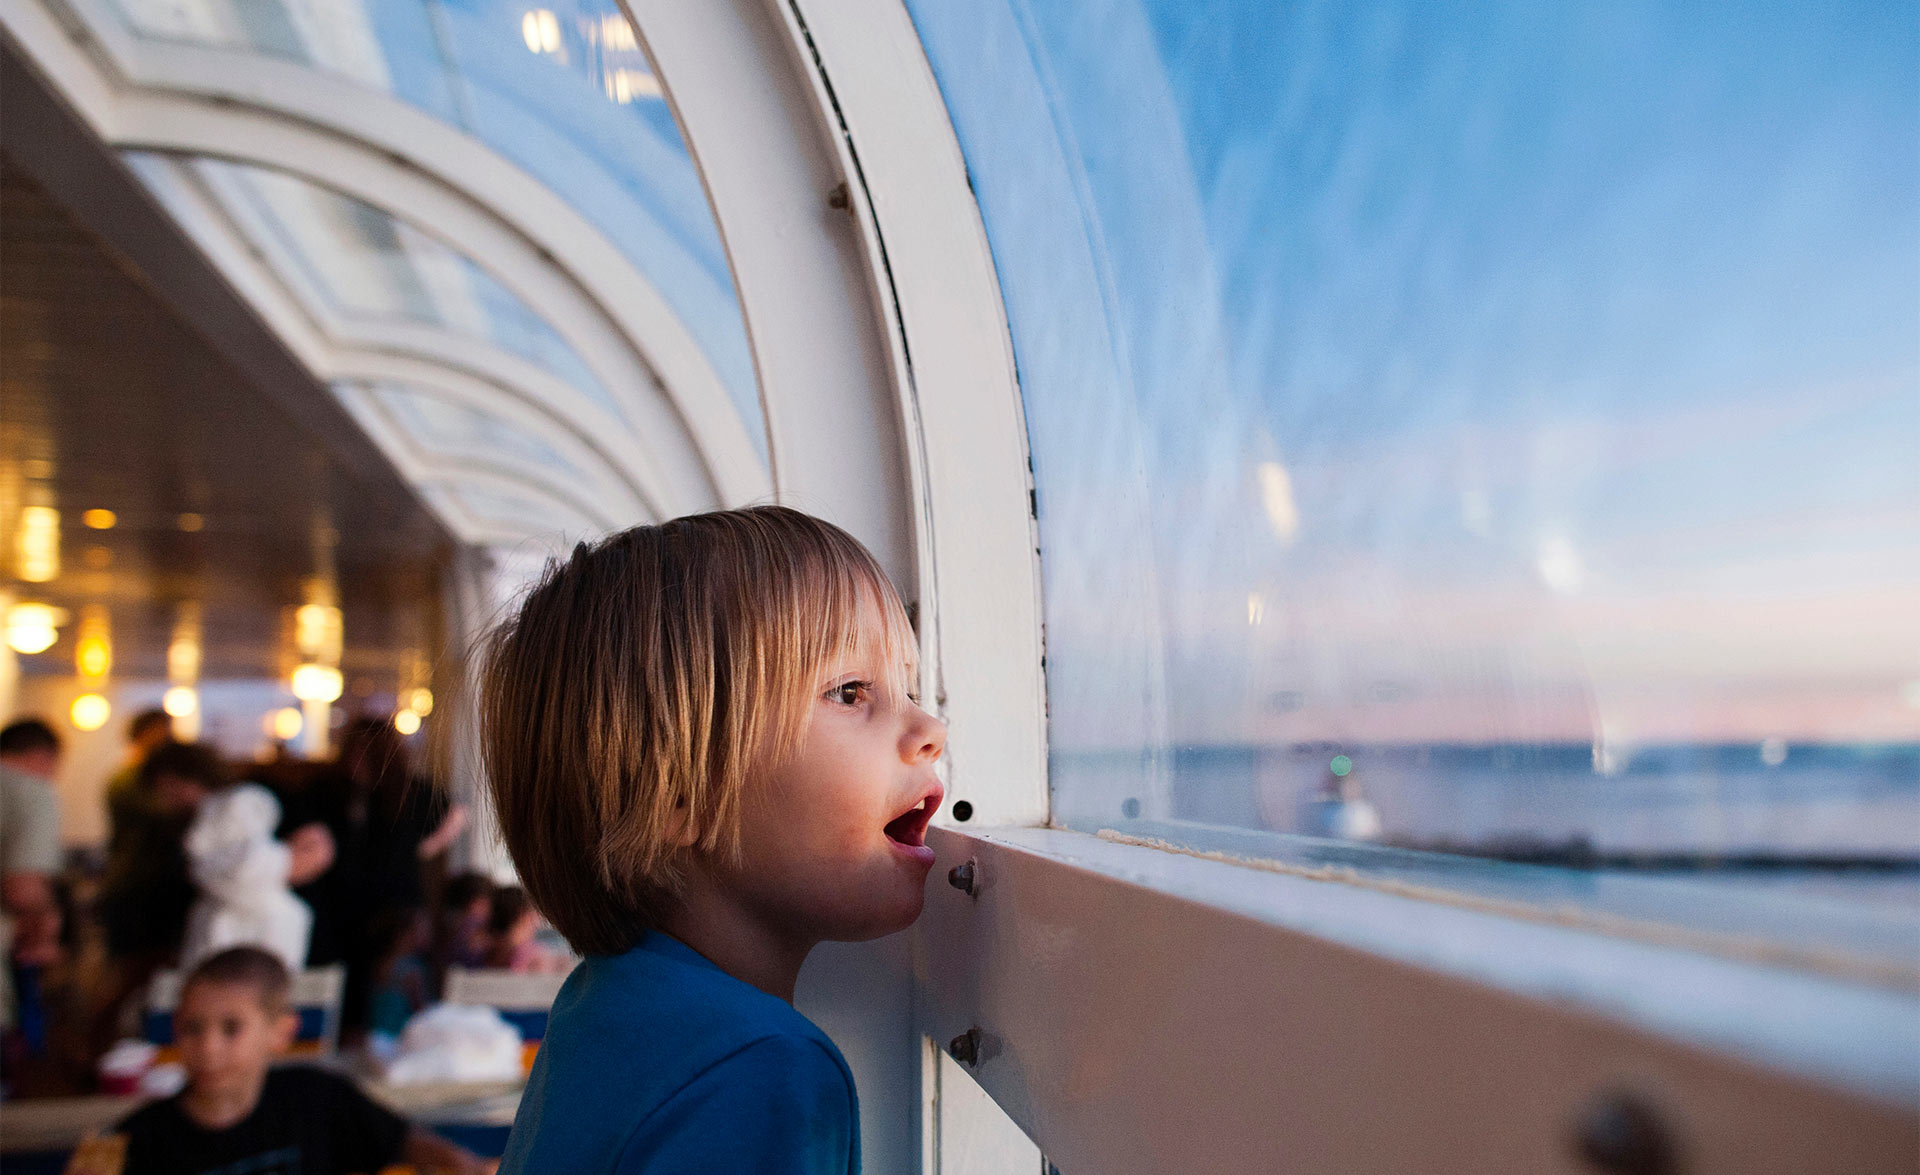 A boy on a cruise ship looking out the window